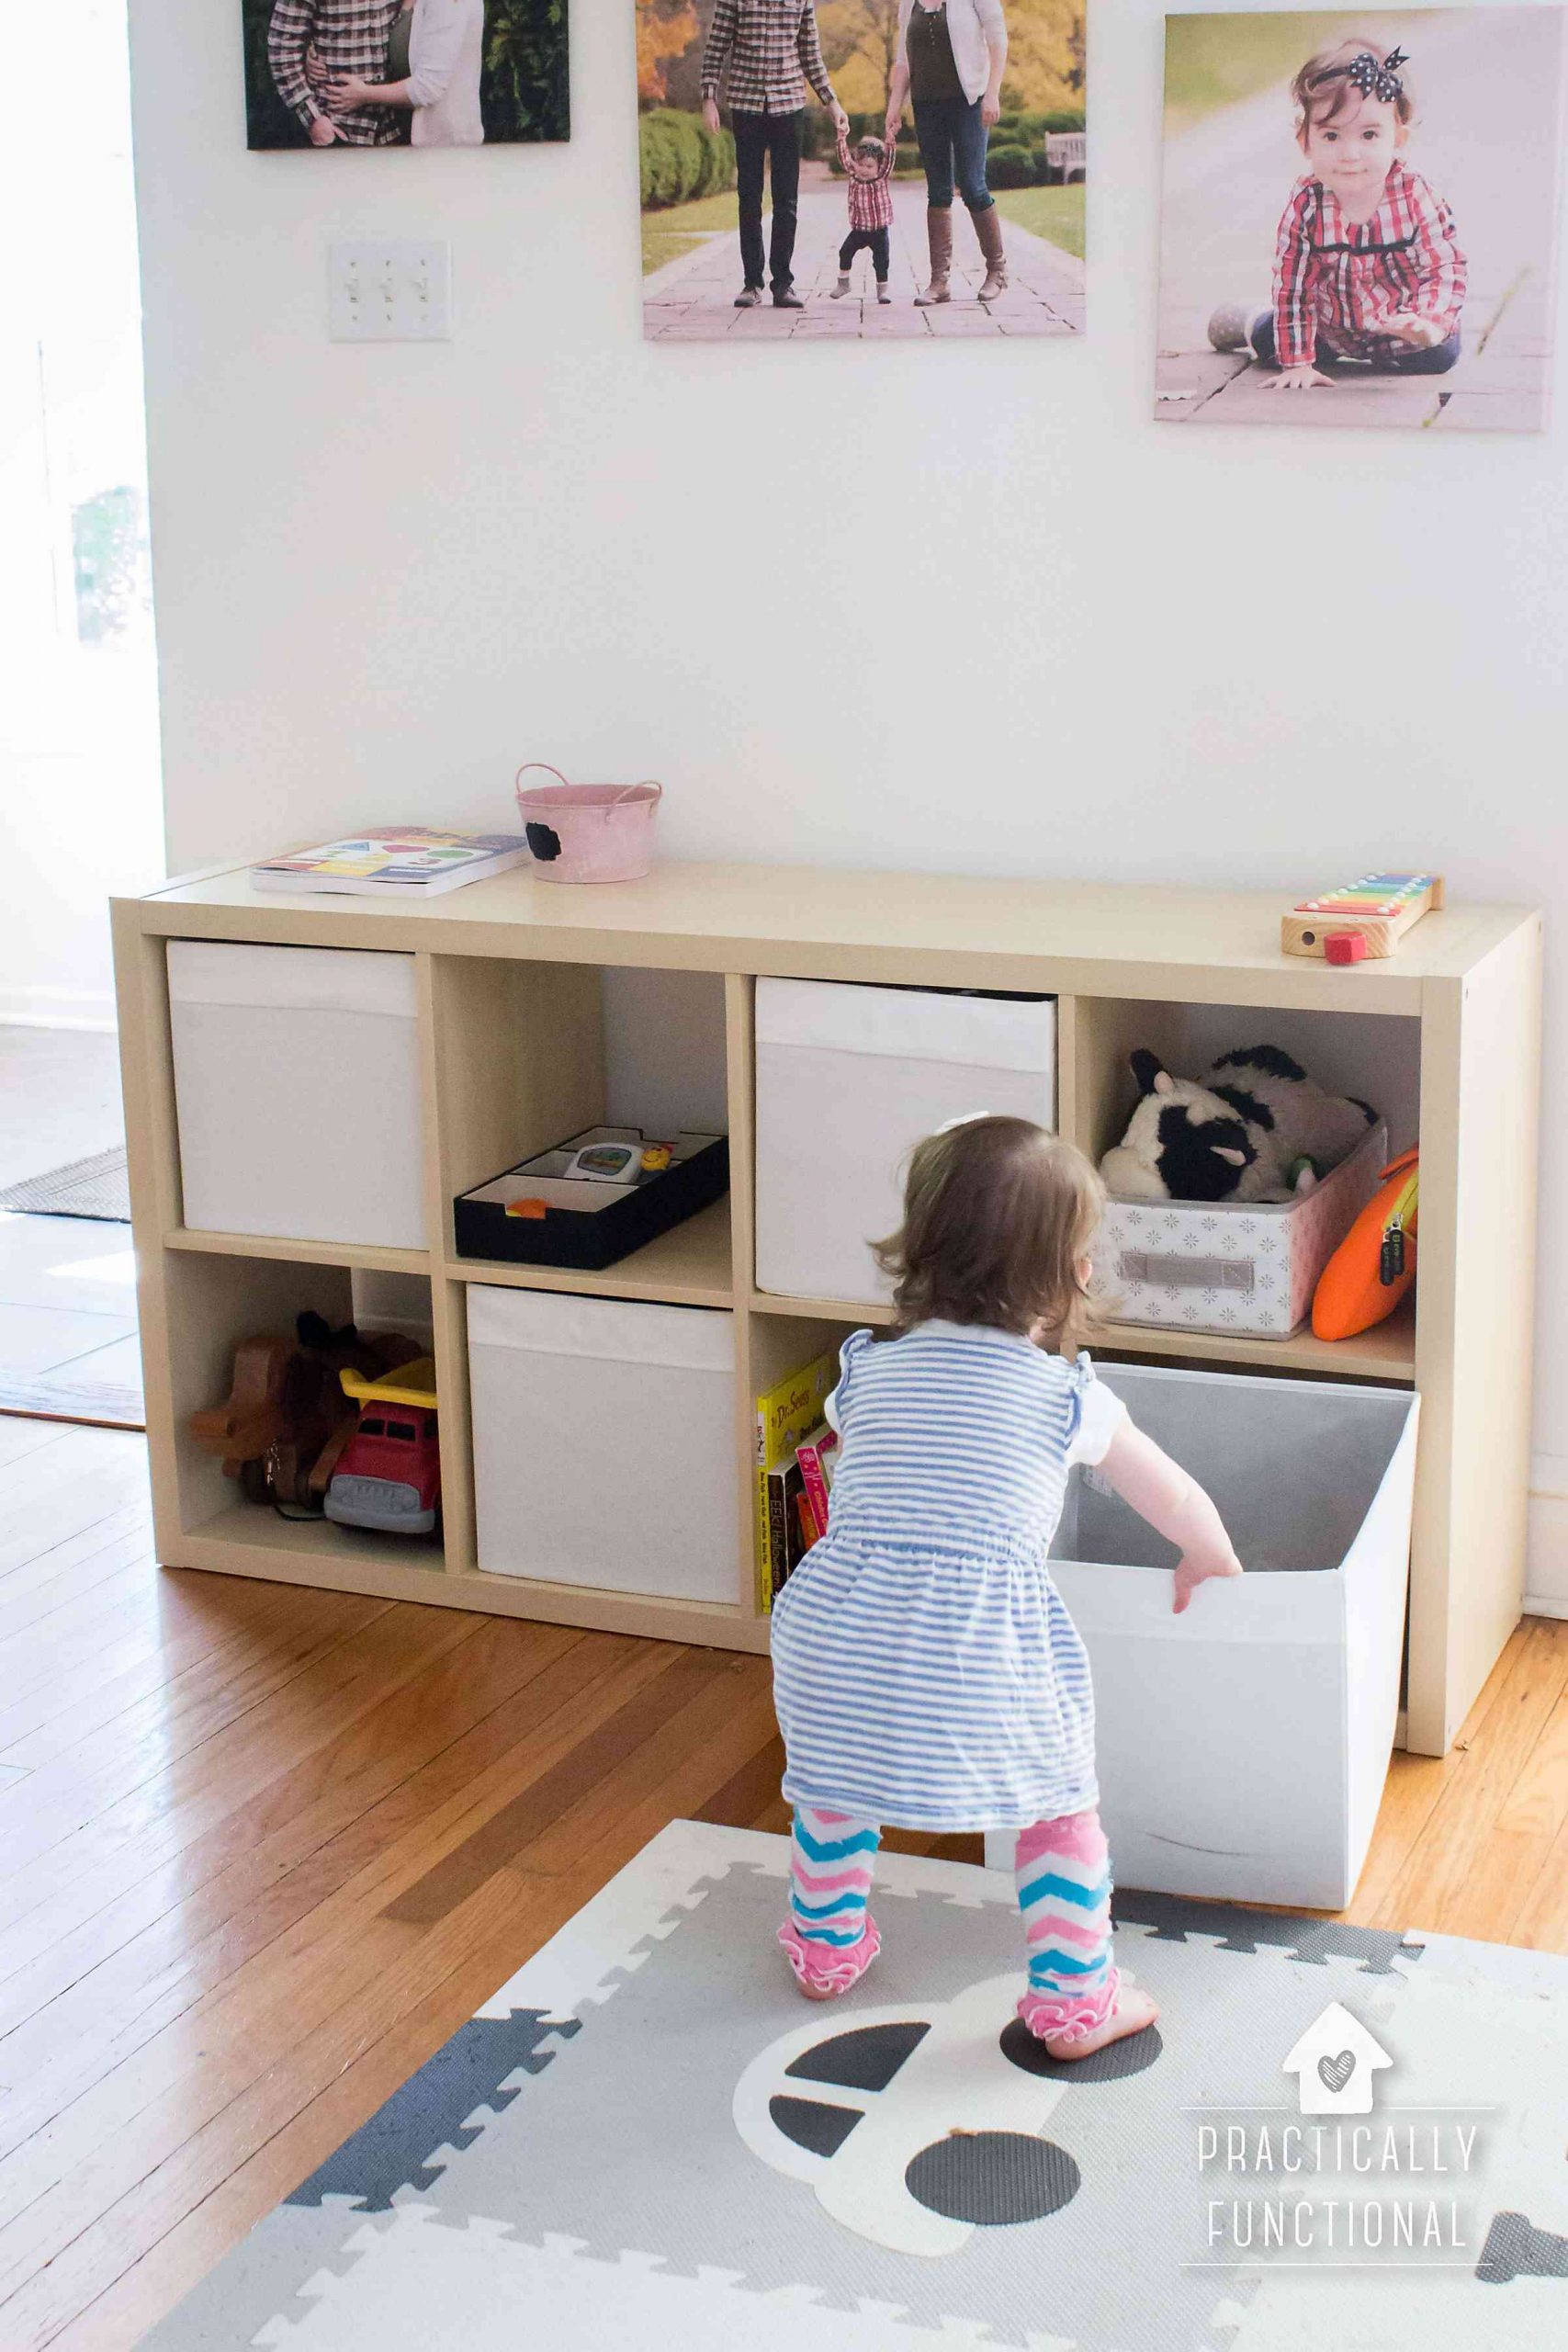 Let's Get Organized! Small Toy Organization and Storage Solutions